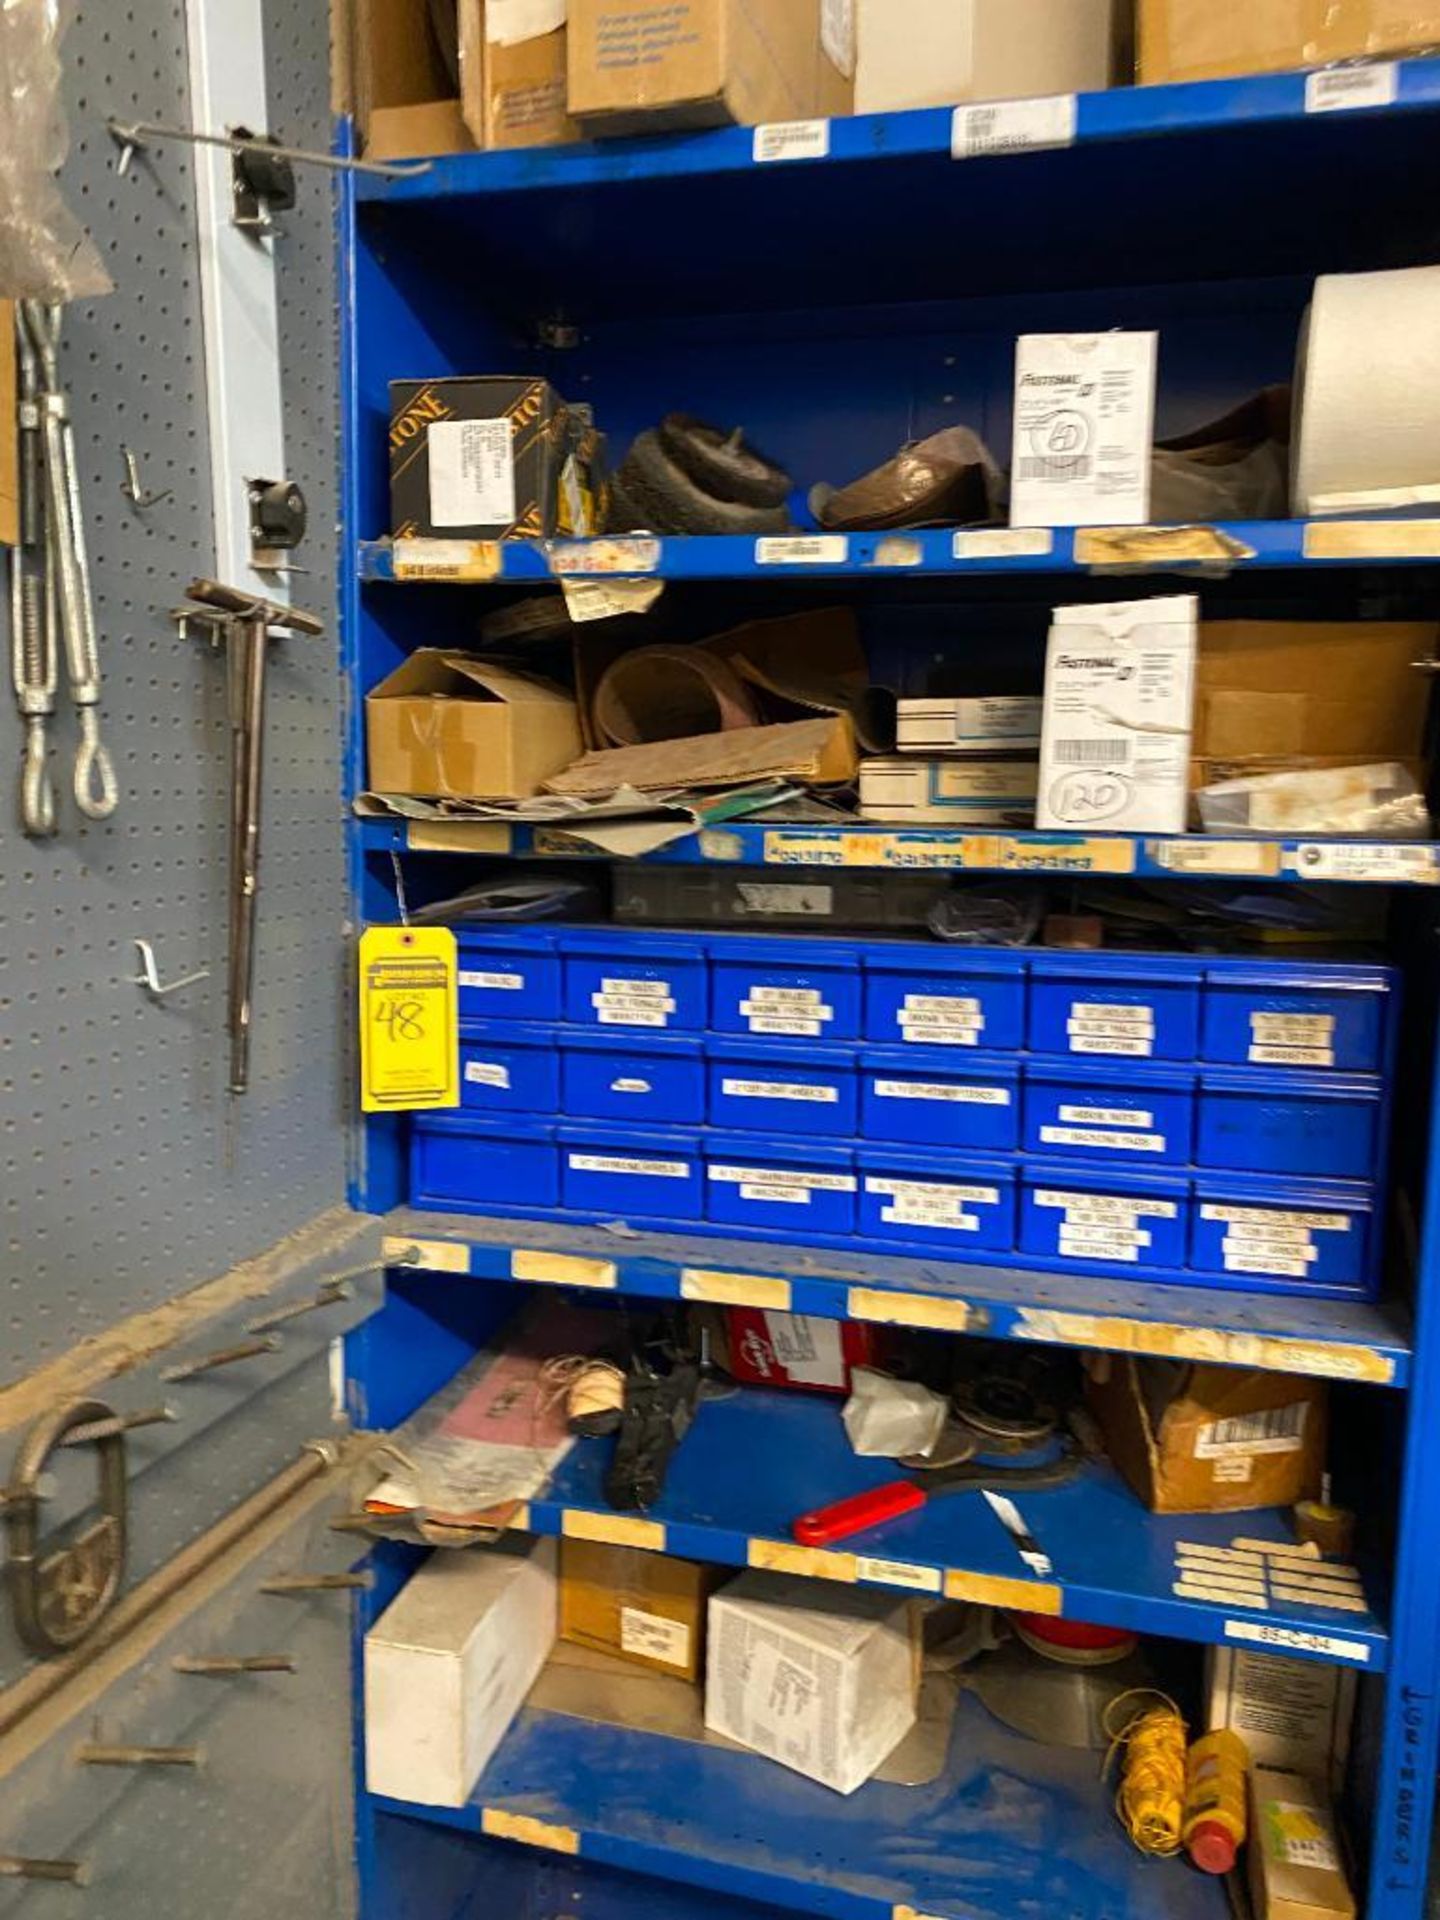 Contents of Storeroom; (8) Sections of Shelving & Contents, (2) File Cabinets, & (2) Tables - Image 6 of 8